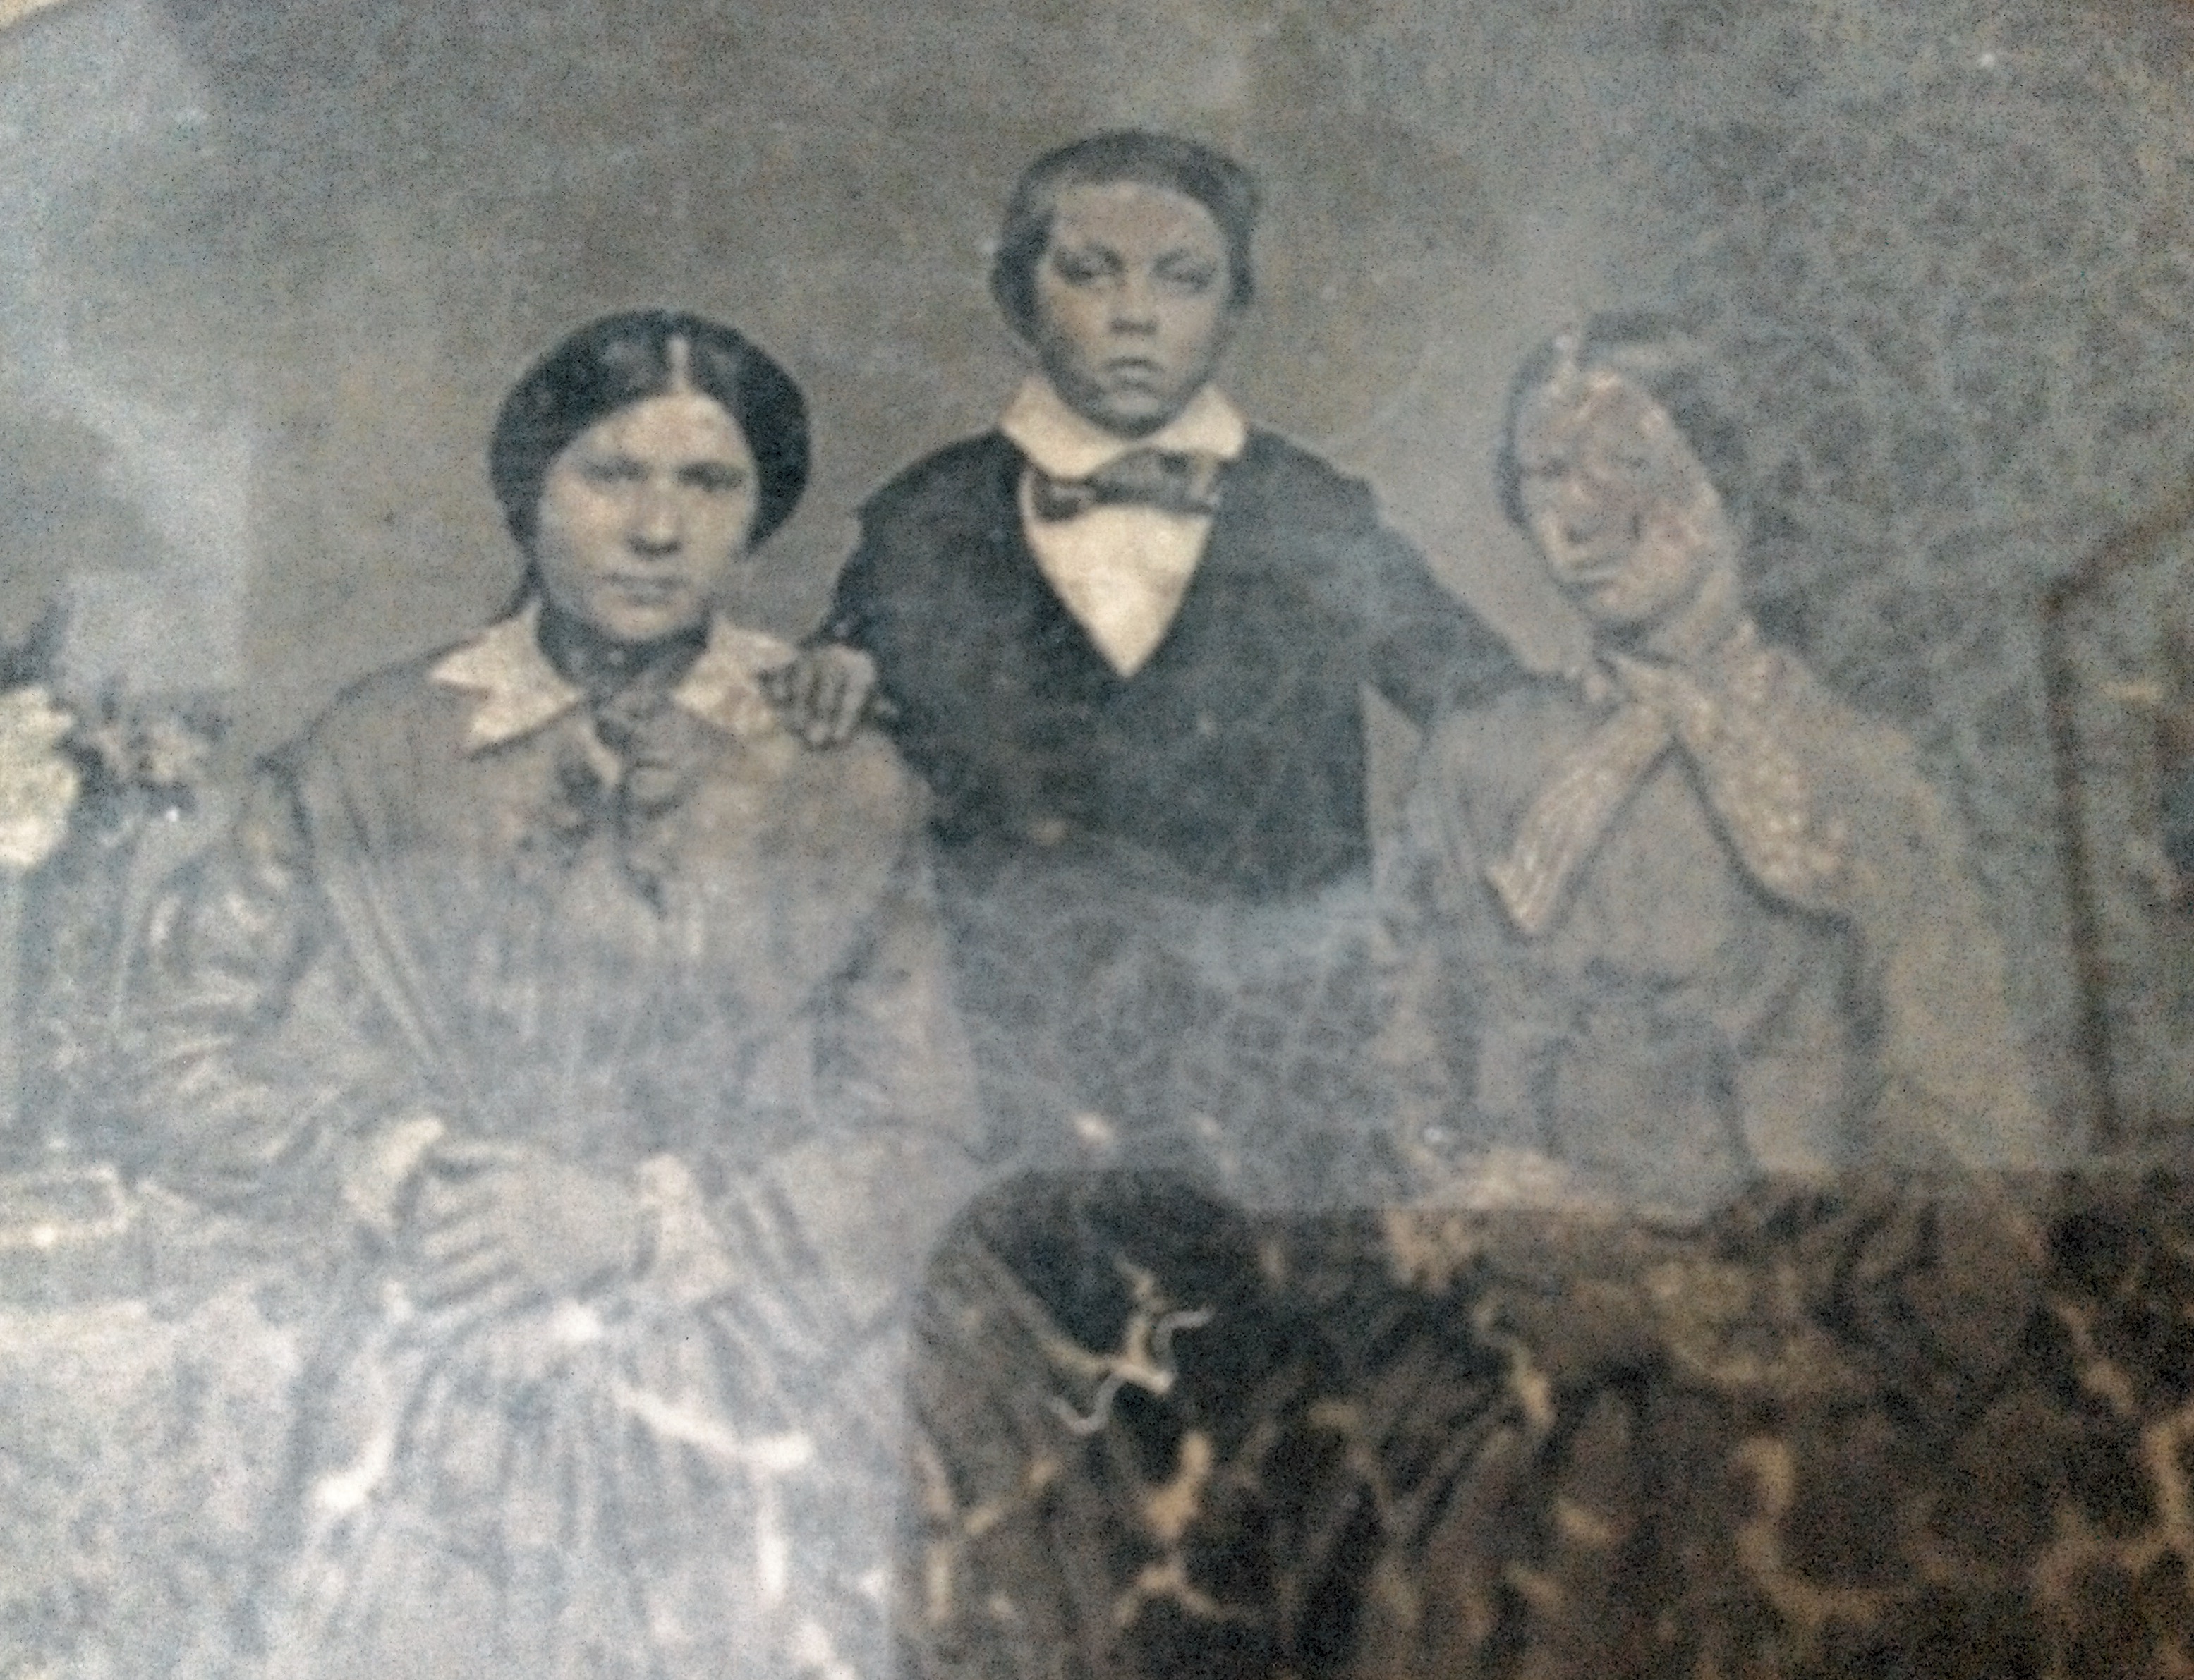 Charles Noyes (grandfather of Phyllis Eardley-Simpson, great grandfather of Susan Beech nee E-S) and his 2 sisters. On right, she died young. On left, married a parson, Withers, and had a daughter Ethel Withers (headmistress of Bury High School). Daguerreotype c1850-70. Some age damage.